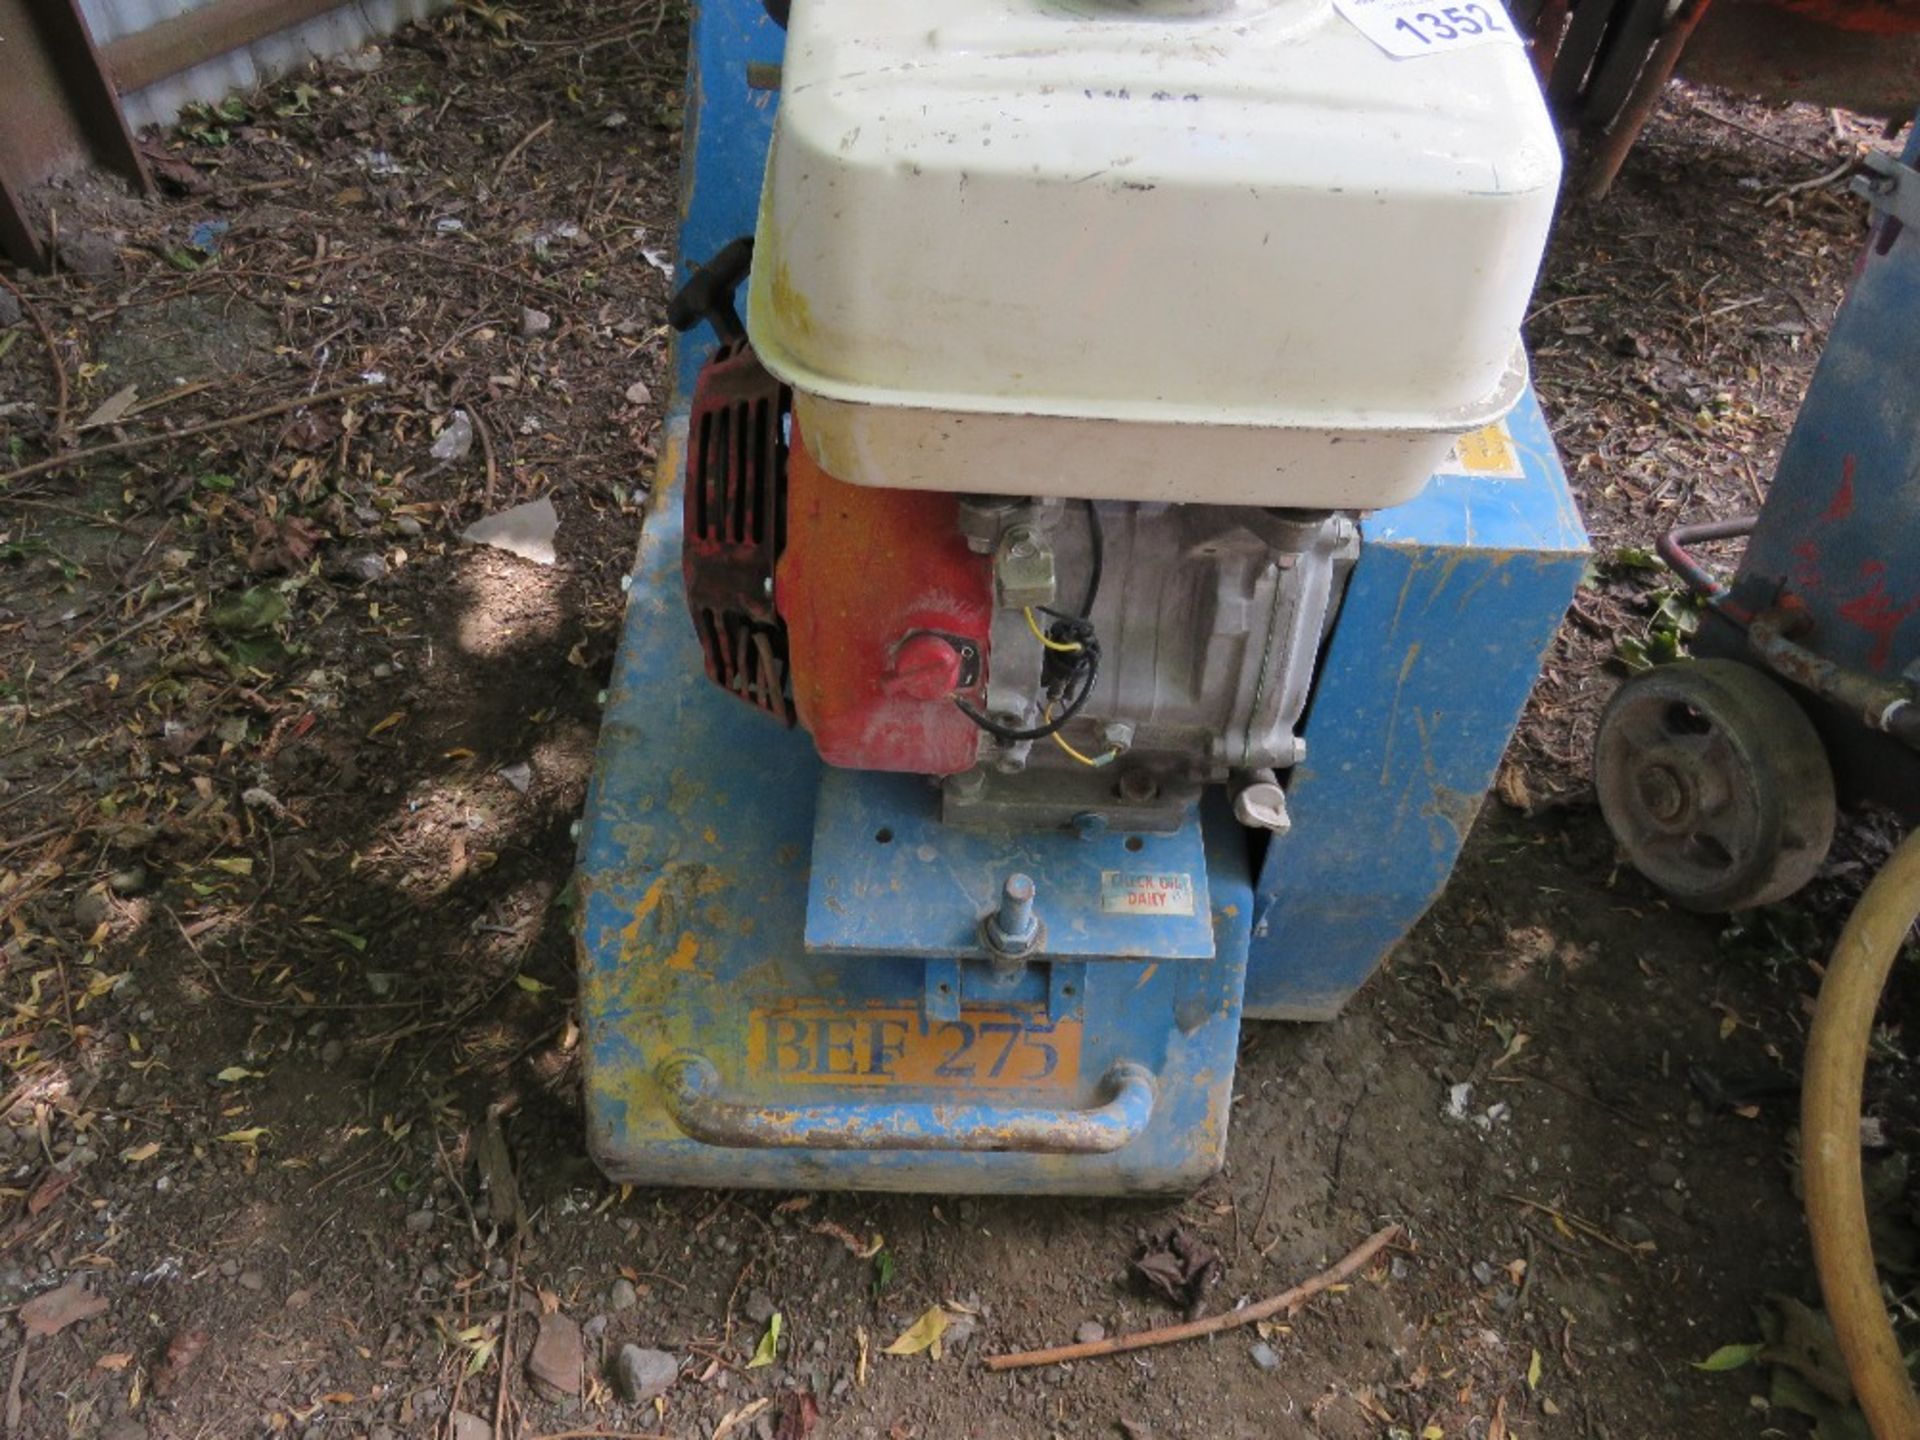 BEF 75 PETROL ENGINED FLOOR GRINDER. DIRECT FROM A LOCAL GROUNDWORKS COMPANY AS PART OF THEIR RES - Image 2 of 3